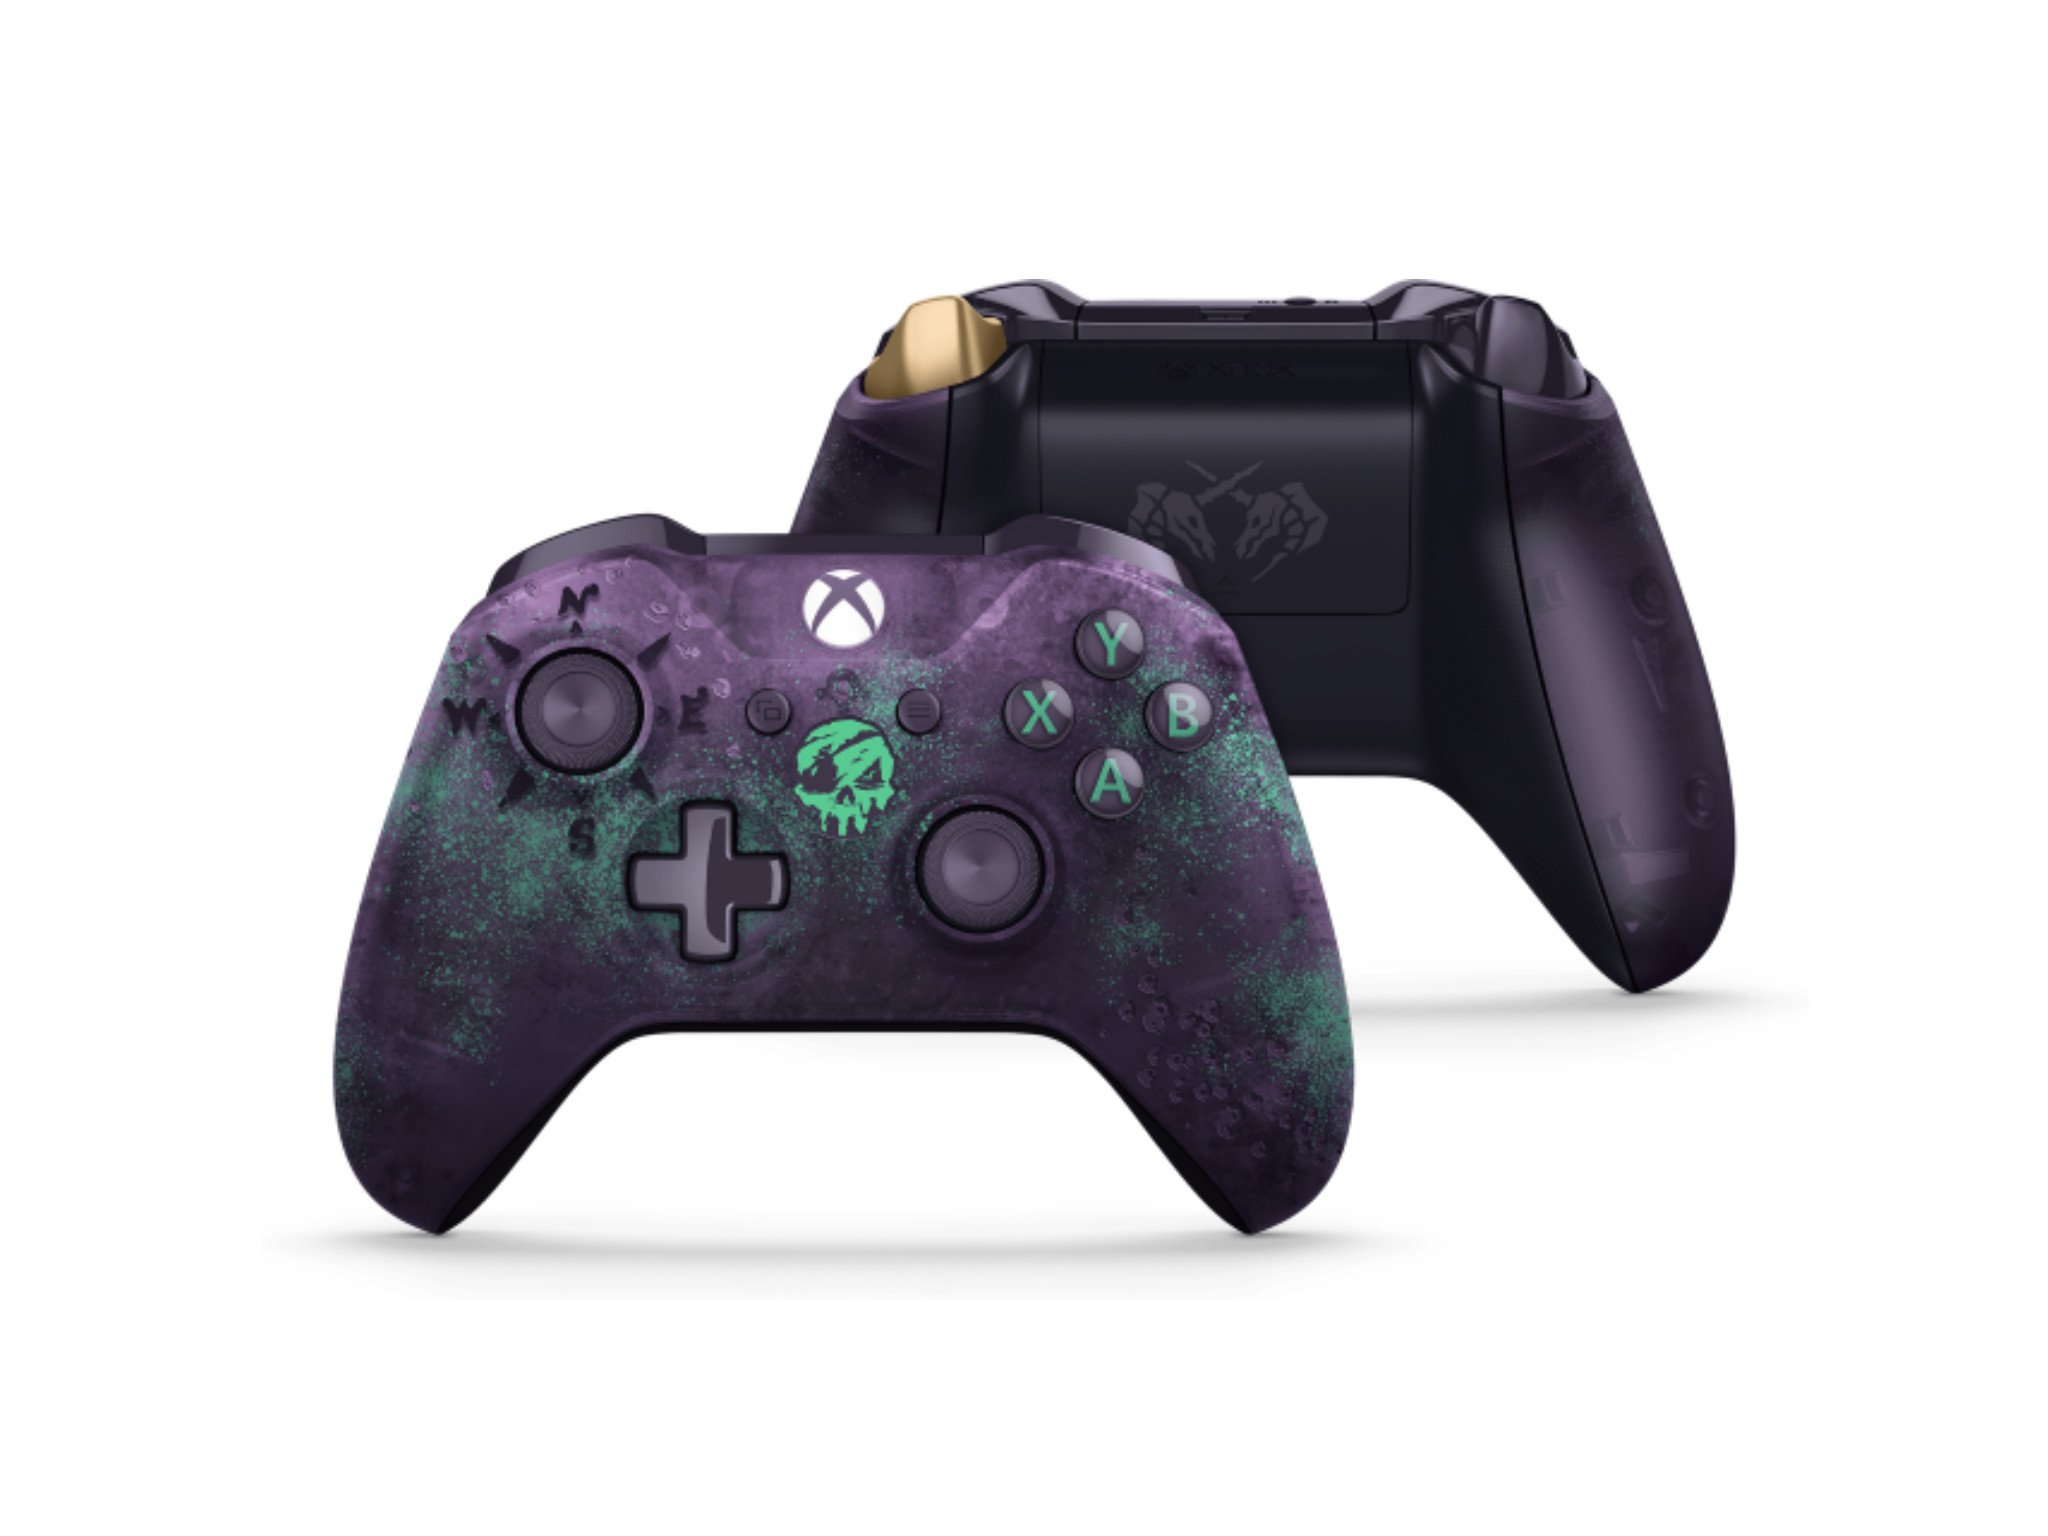 Limited Edition Sea of Thieves Xbox controller now available and shipping